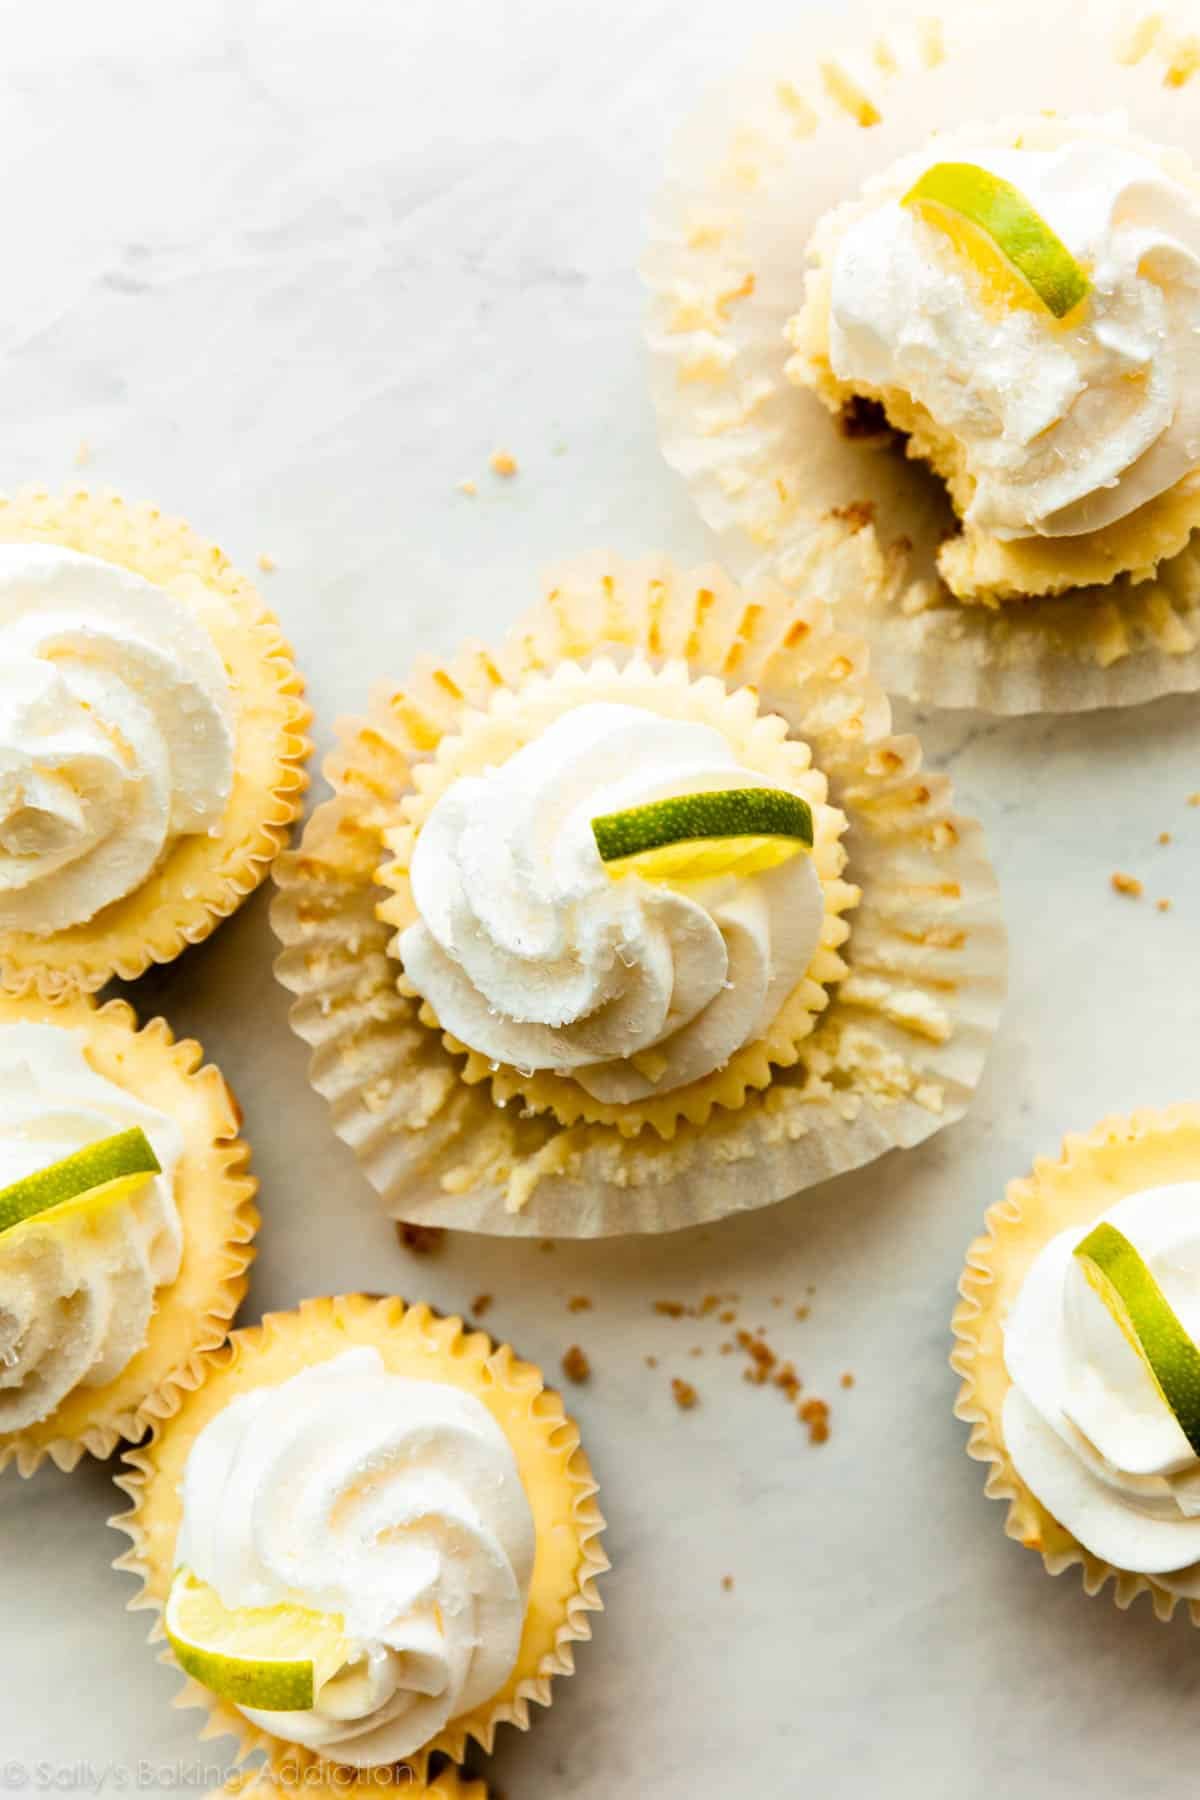 mini margarita cheesecakes with tequila whipped cream and lime slices.